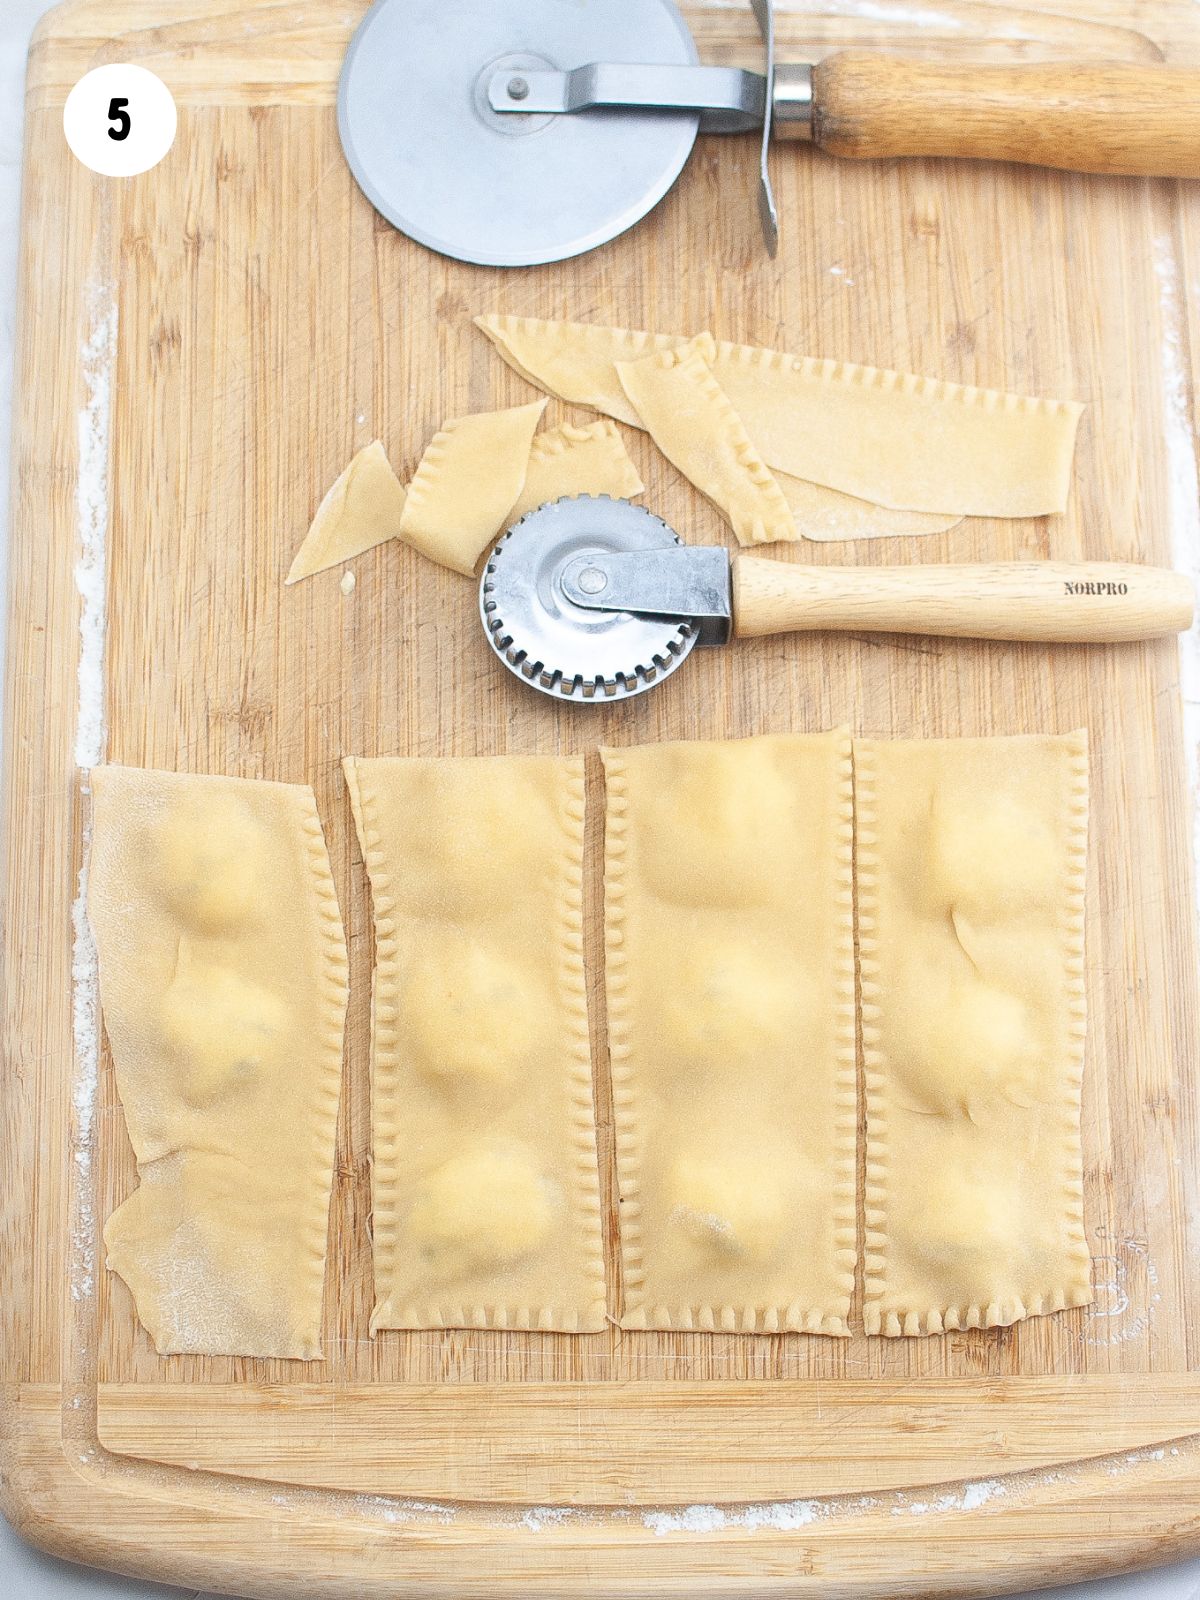 5 - Use a crimping tool to cut out ravioli